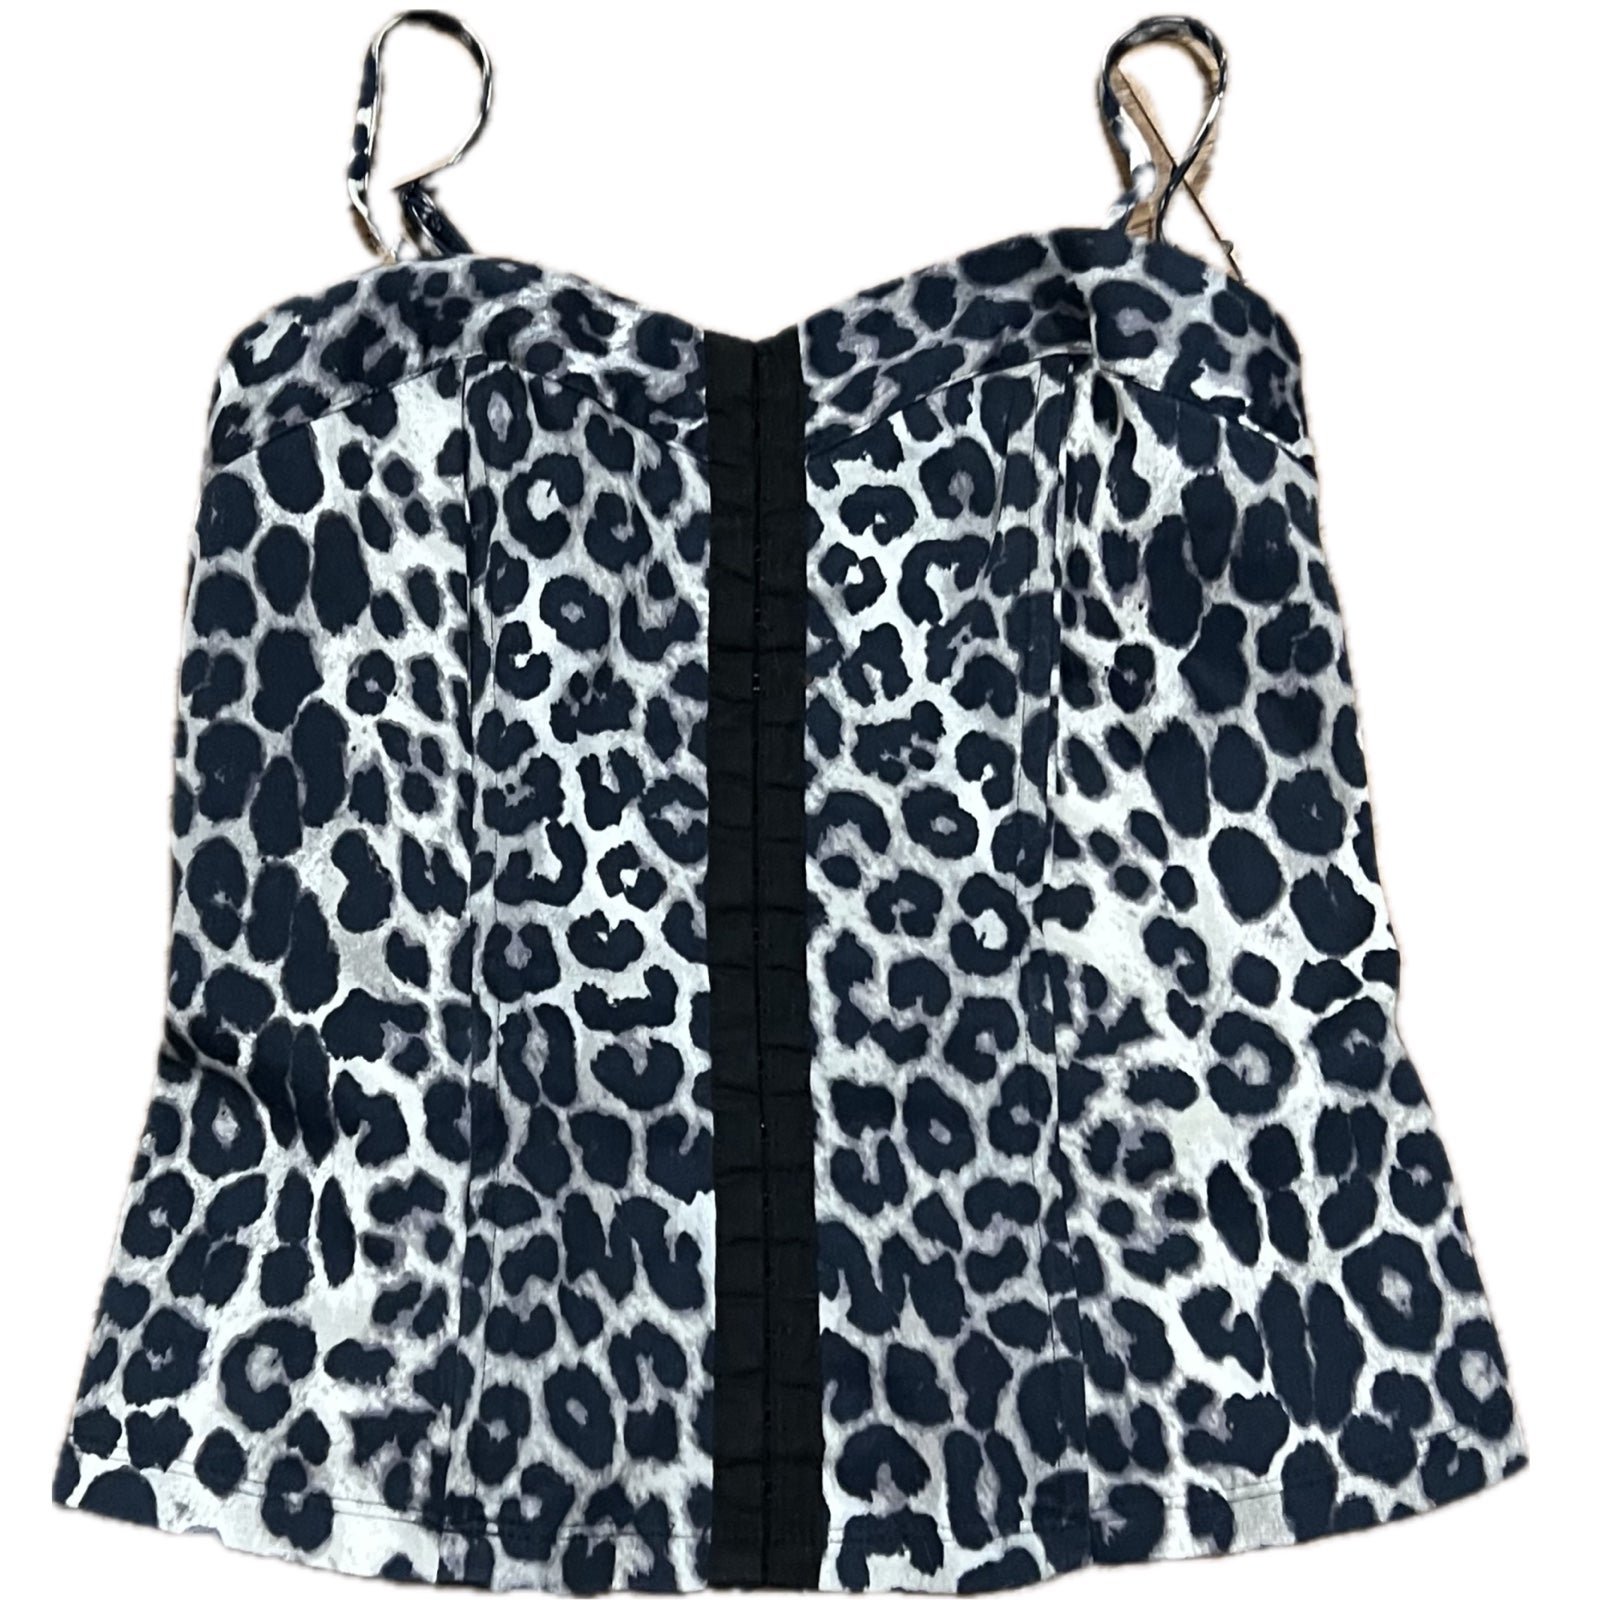 large discount Y2K cheetah print Express corset style top IrY5bkynW just for you